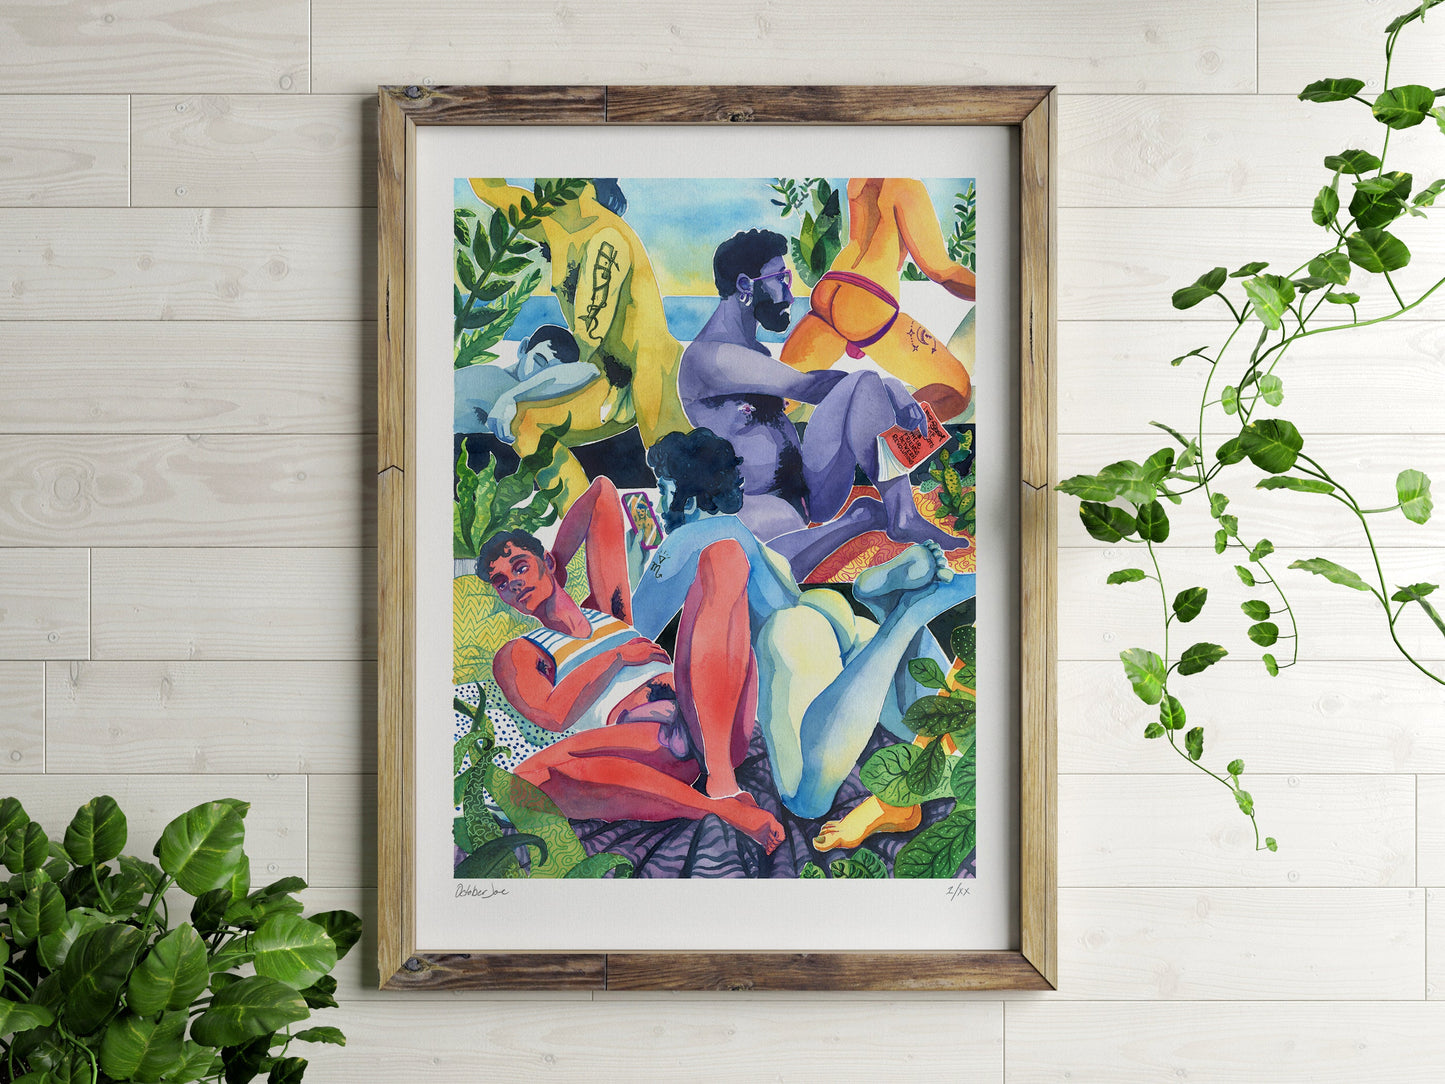 All the Lovers - Original Watercolor Painting